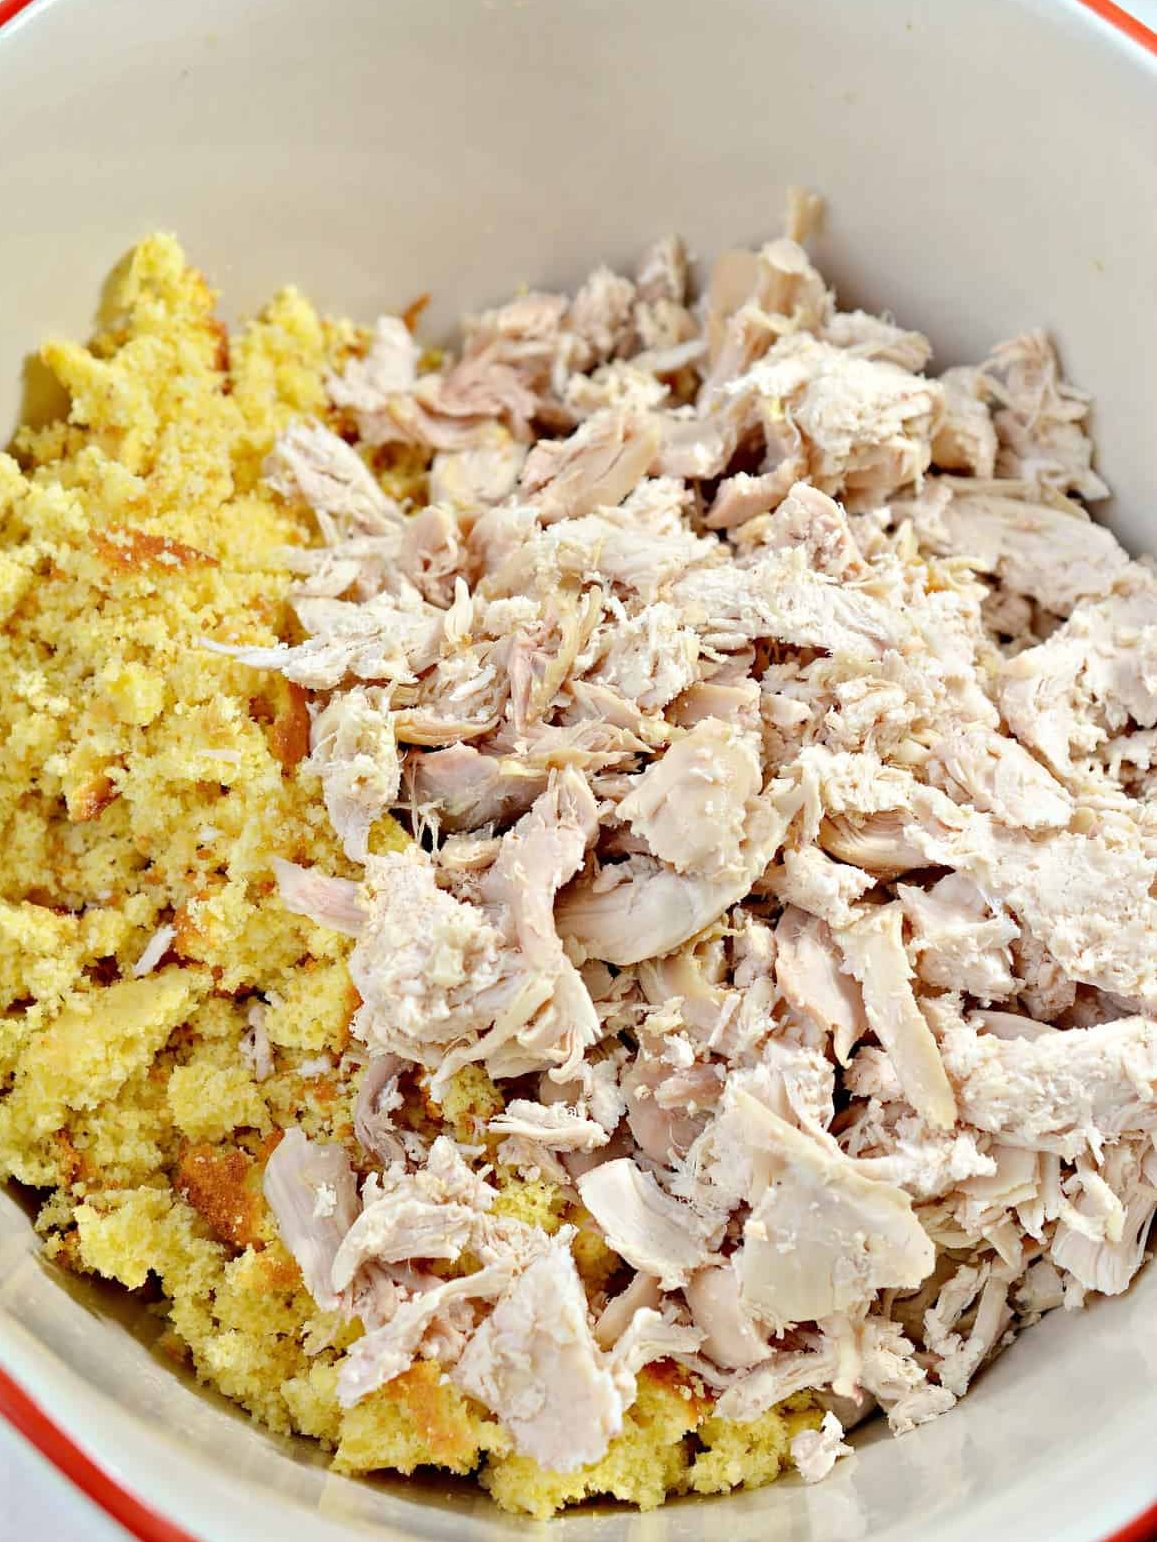 Place the cornbread and chicken into a large mixing bowl.